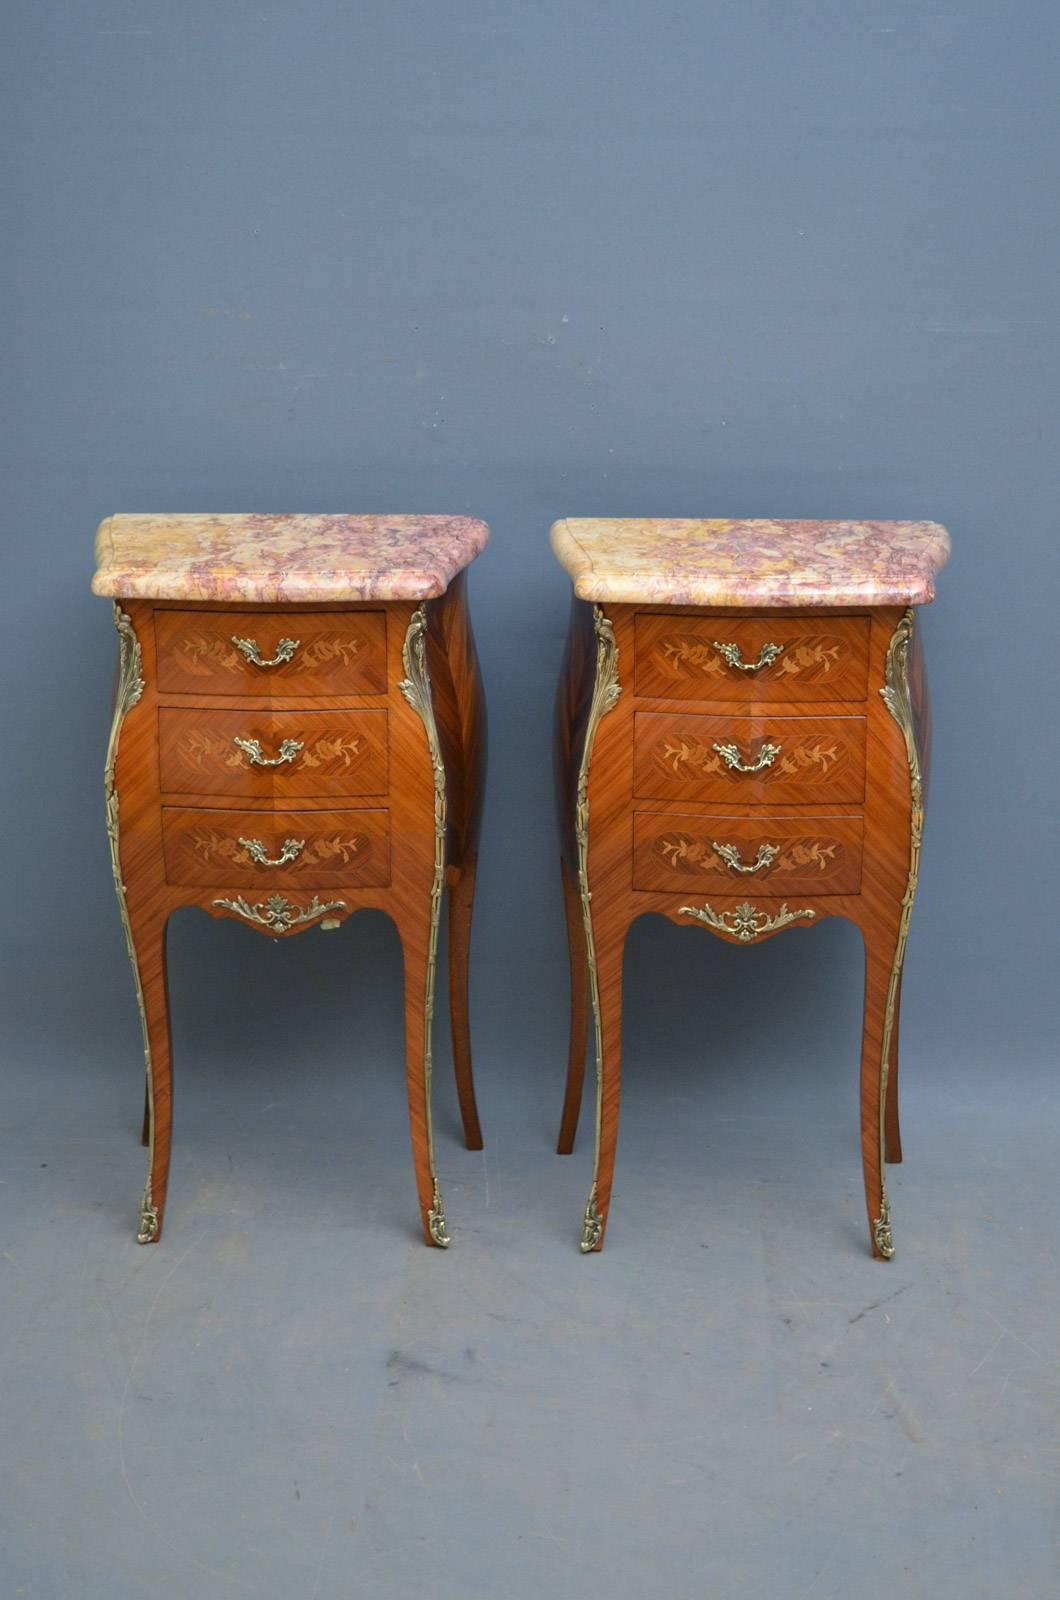 Sn4320 pair of French tulipwood night tables, having serpentine marble tops above three flower inlaid drawers fitted with original brass handles, and flanked by ormolu decoration from top to bottom and shaped, string inlaid sides, all standing on